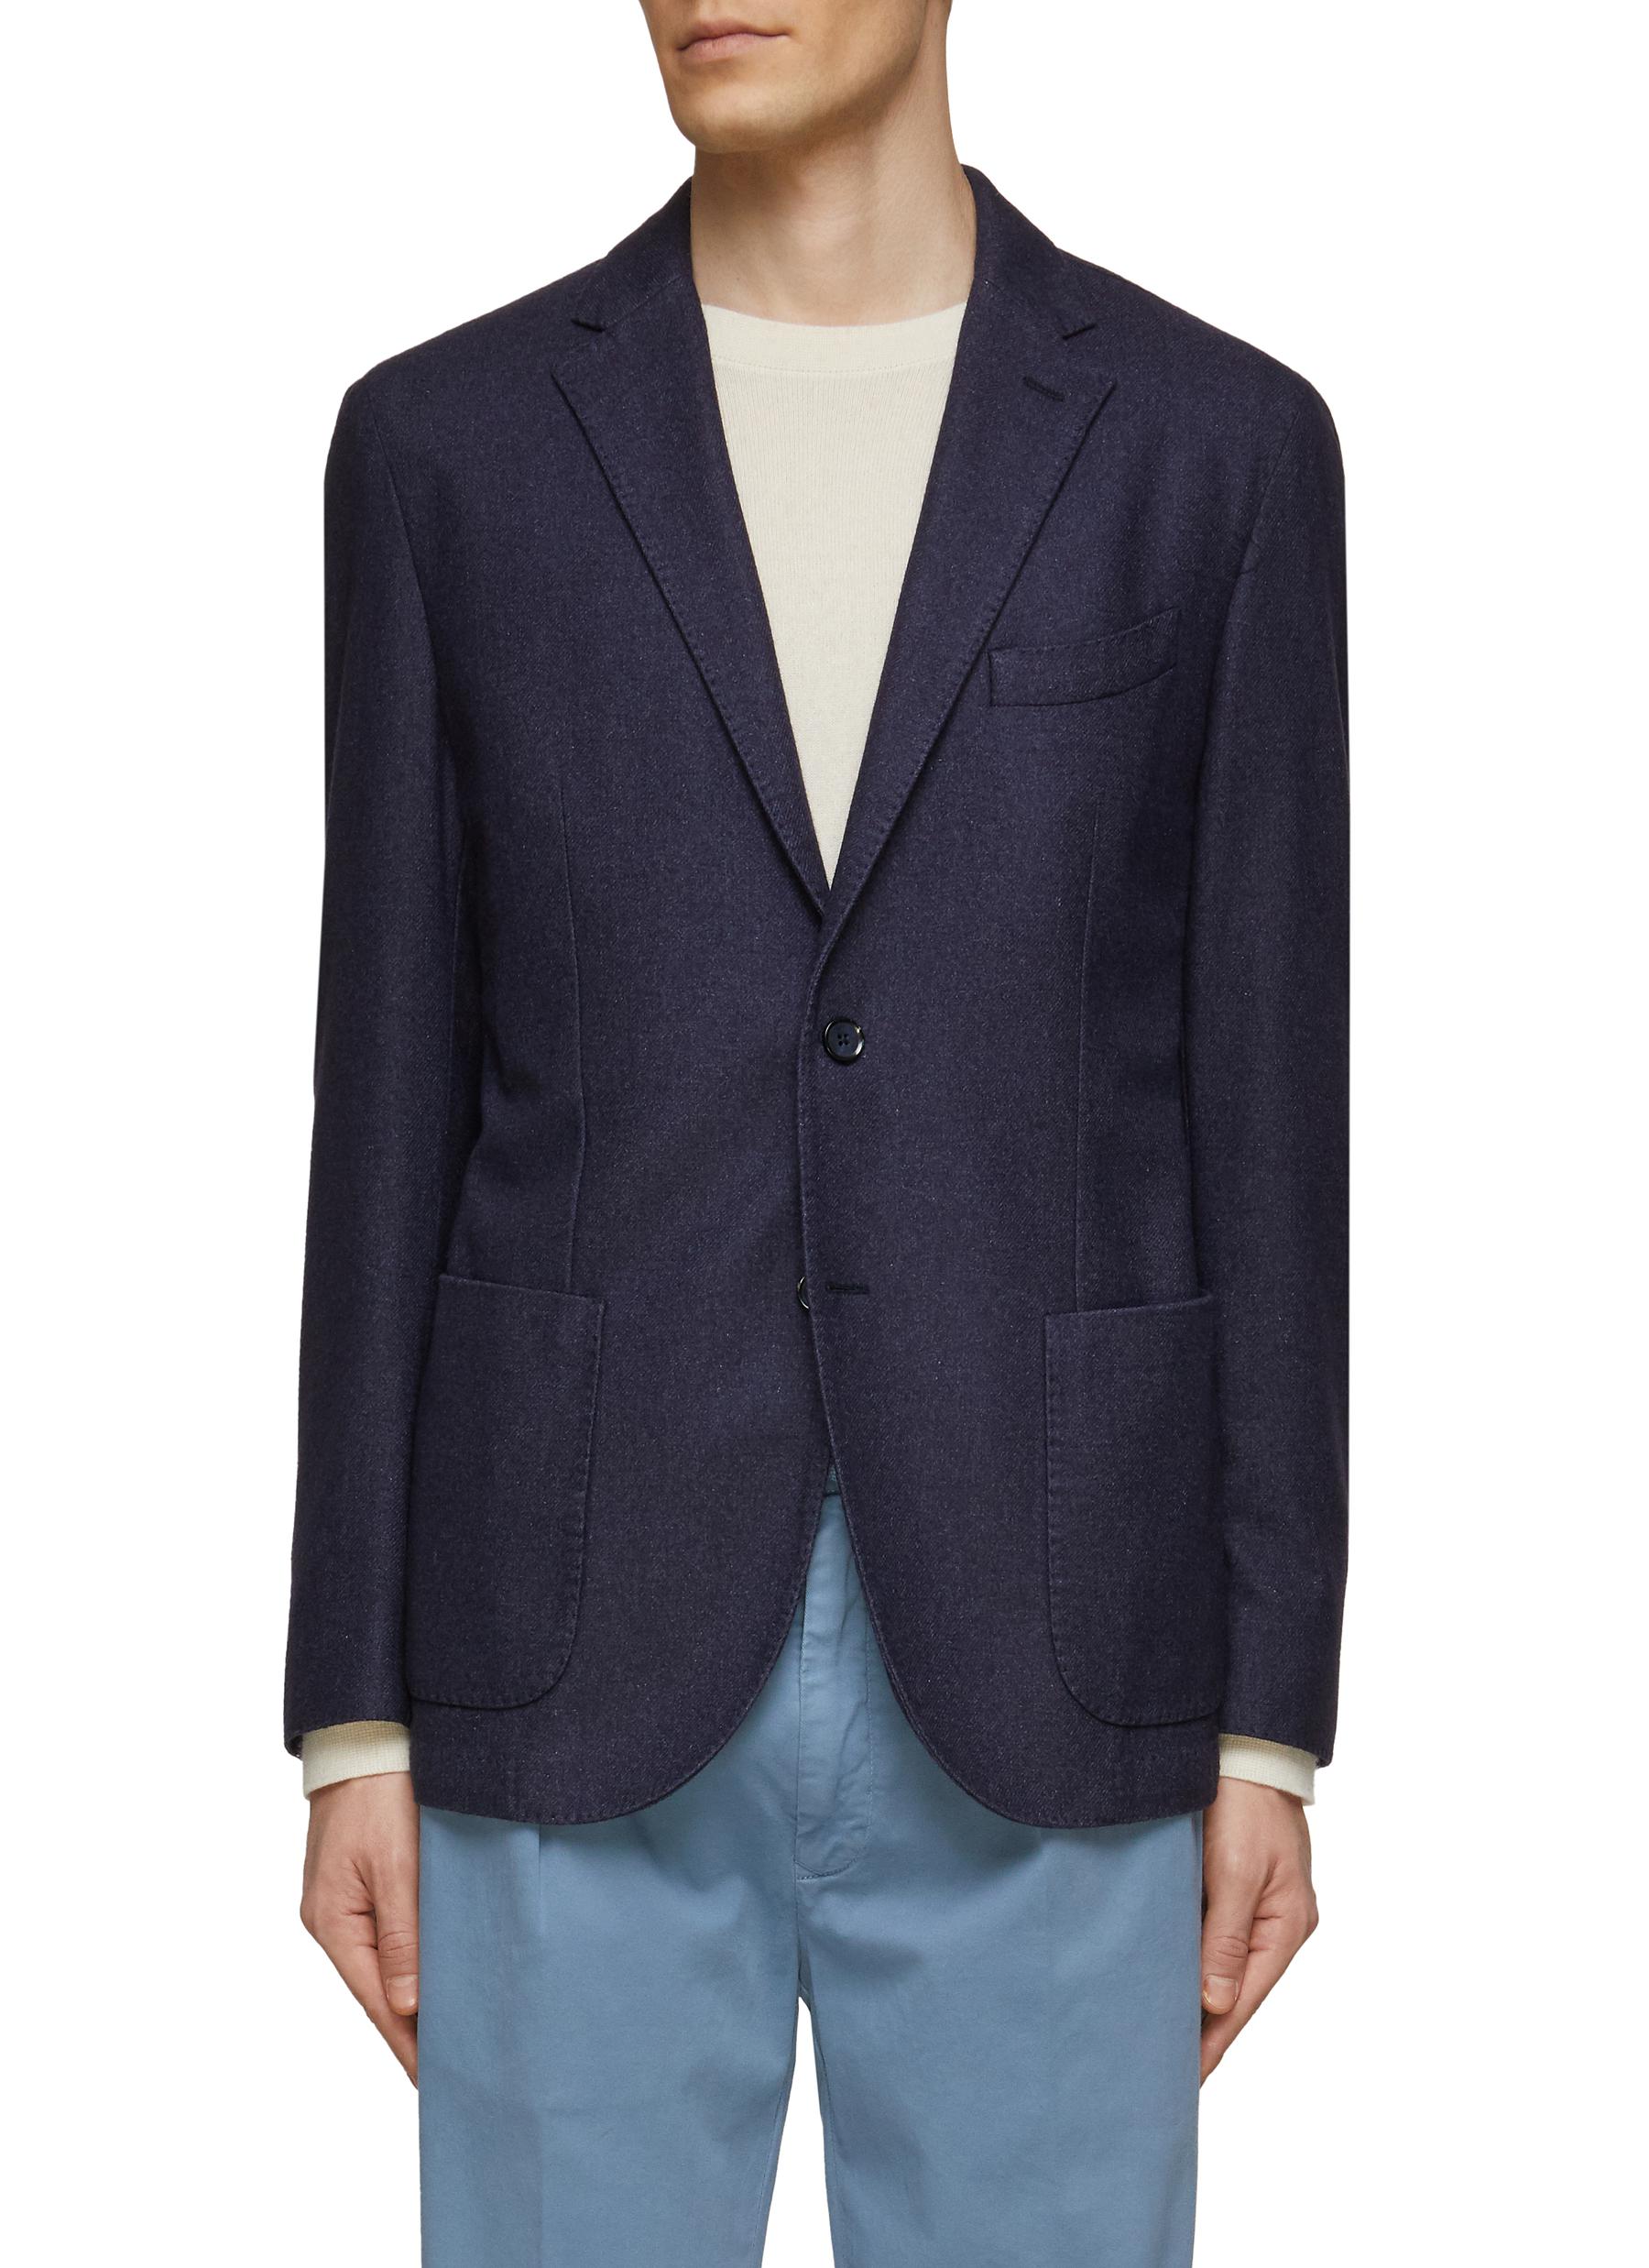 EQUIL ‘JACK' NOTCH LAPEL PATCH POCKET GARMENT DYED SINGLE BREASTED WOOL BLAZER